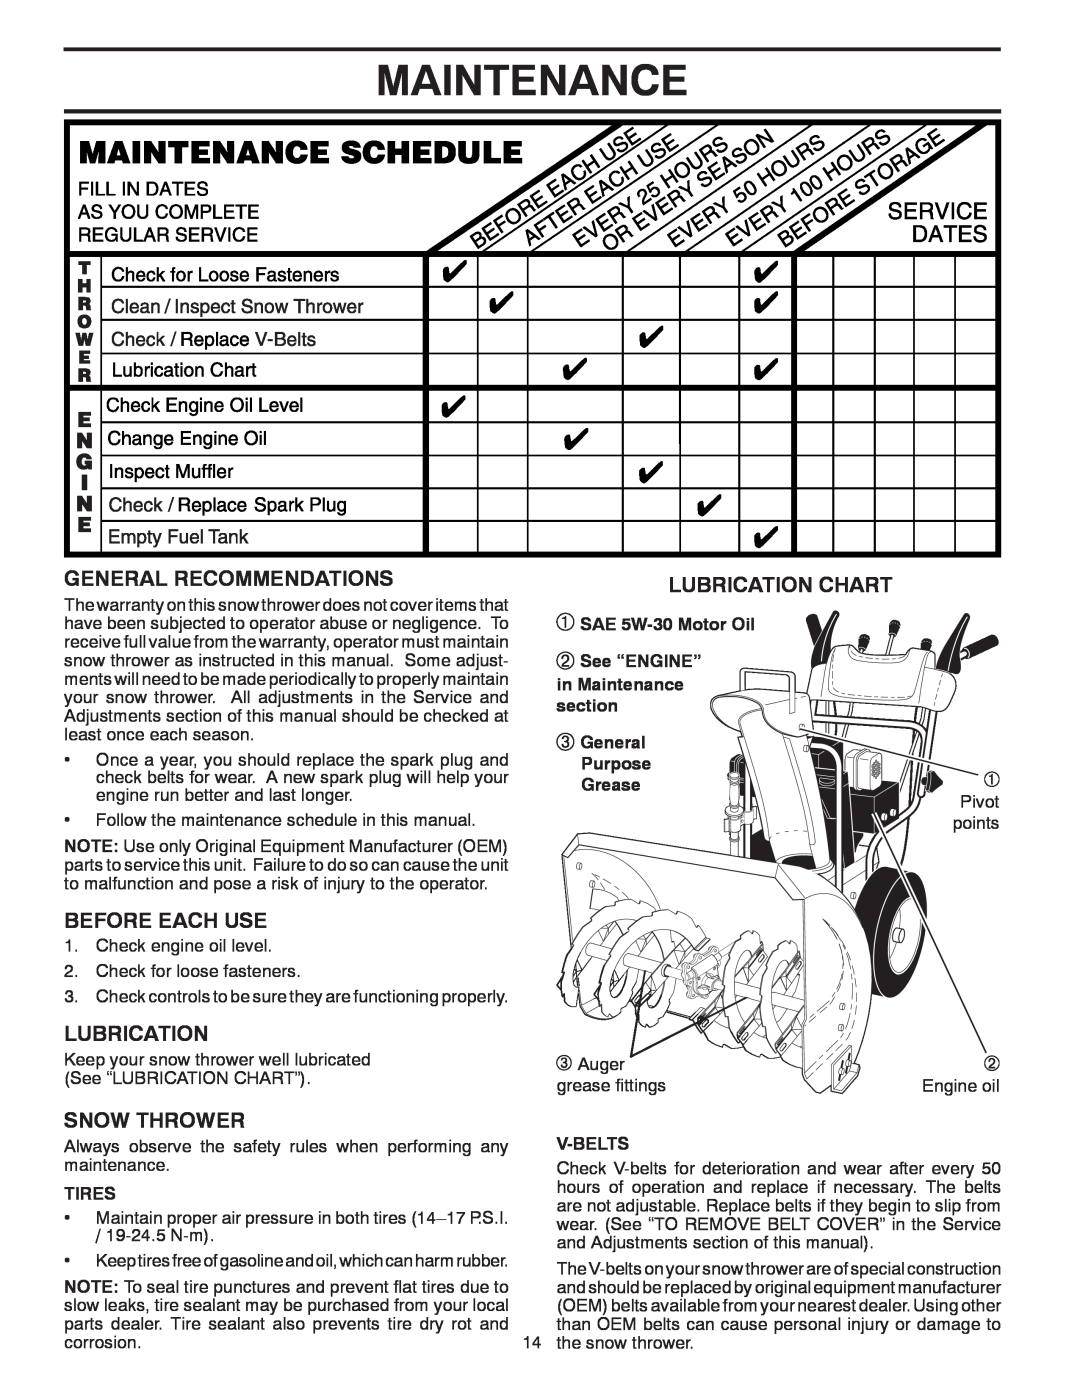 Poulan 414639 Maintenance, General Recommendations, Before Each Use, Lubrication Chart, Snow Thrower, Purpose Grease 